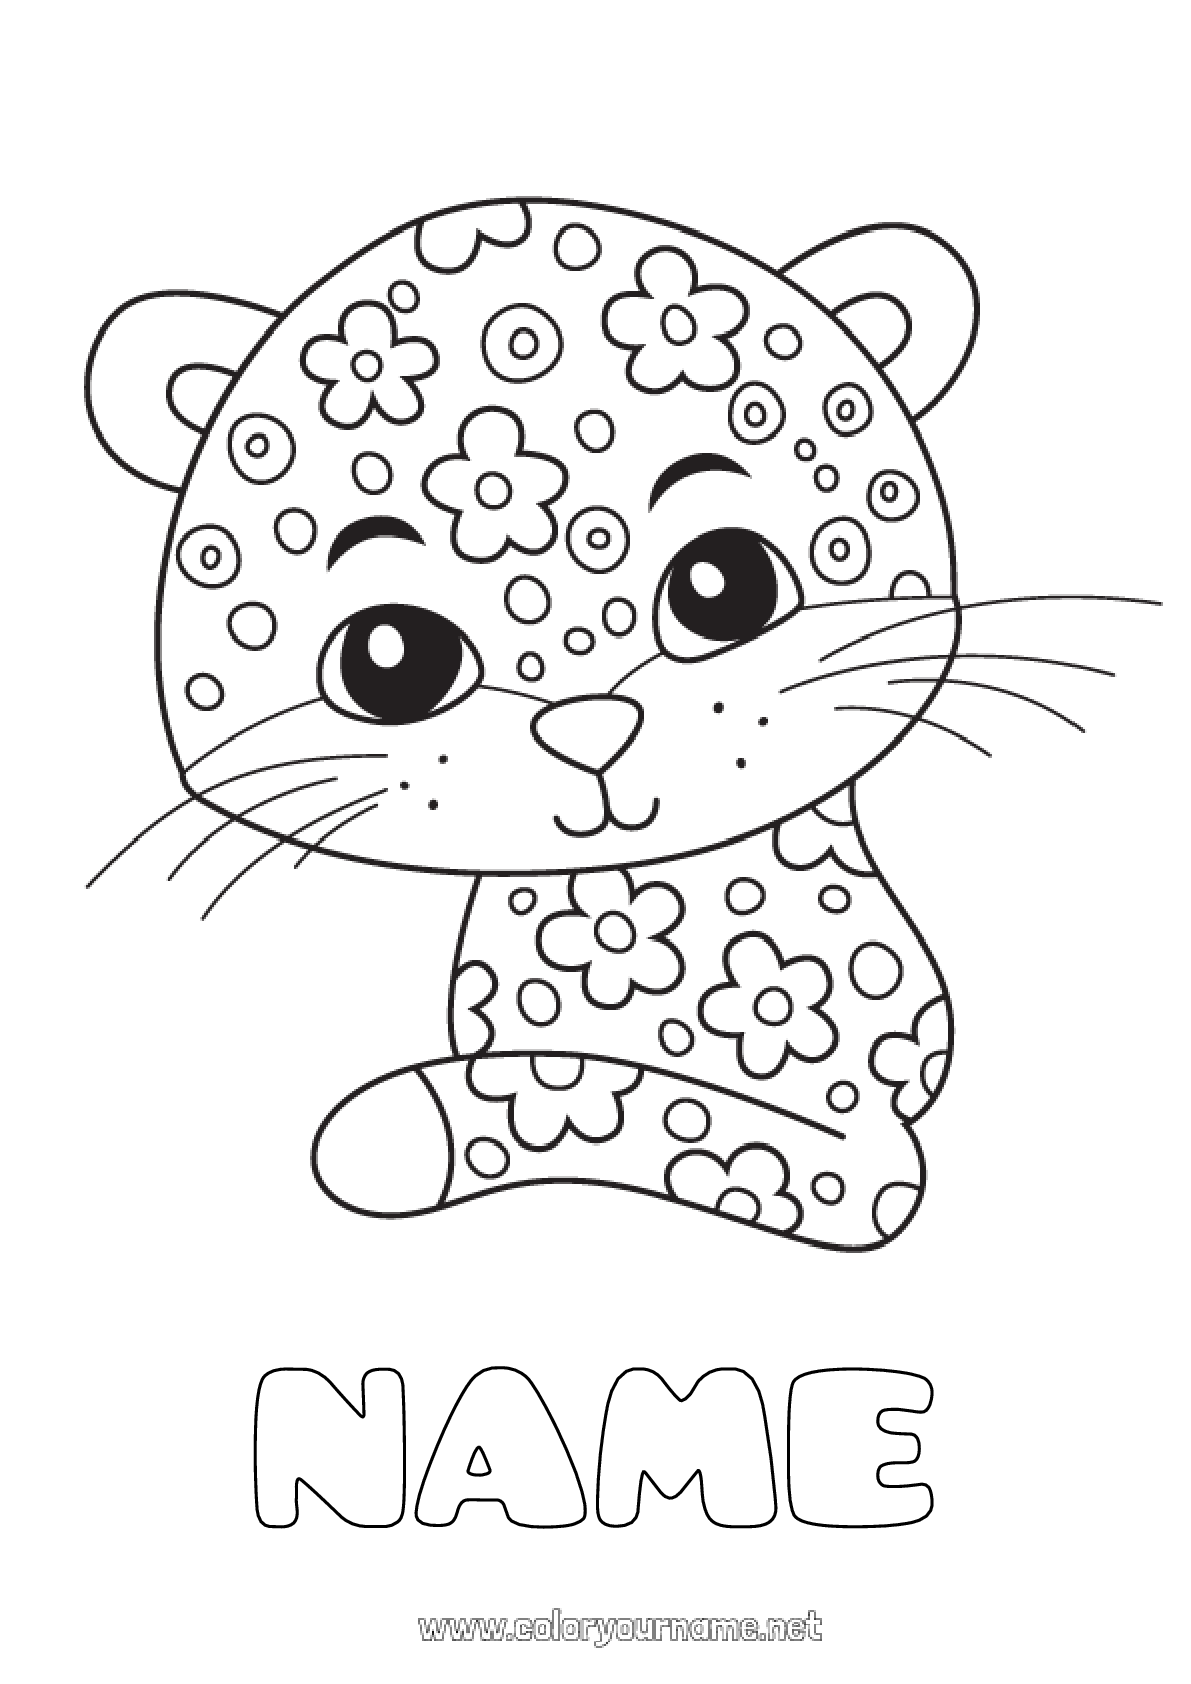 cute baby cheetah coloring pages